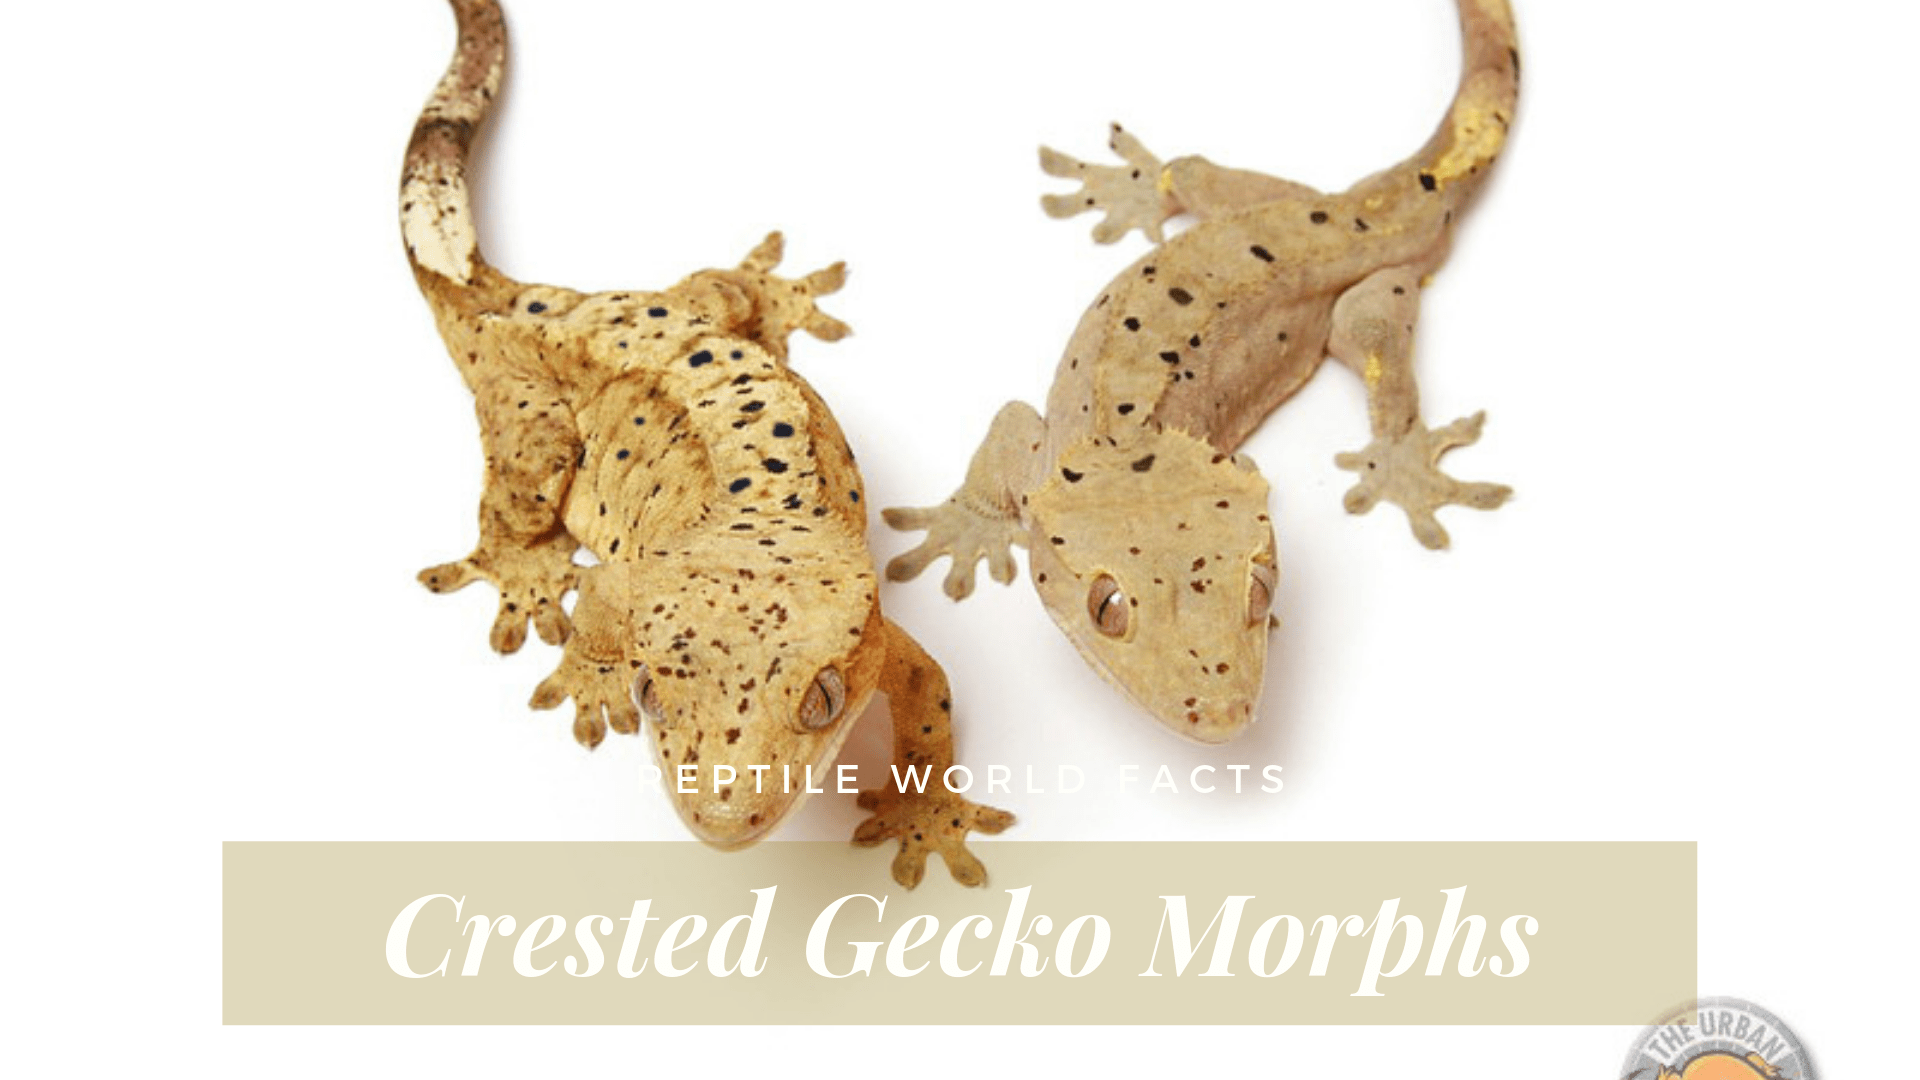 10 Cute Crested Gecko Morphs Reptileworldfacts,Melt Chocolate Machine